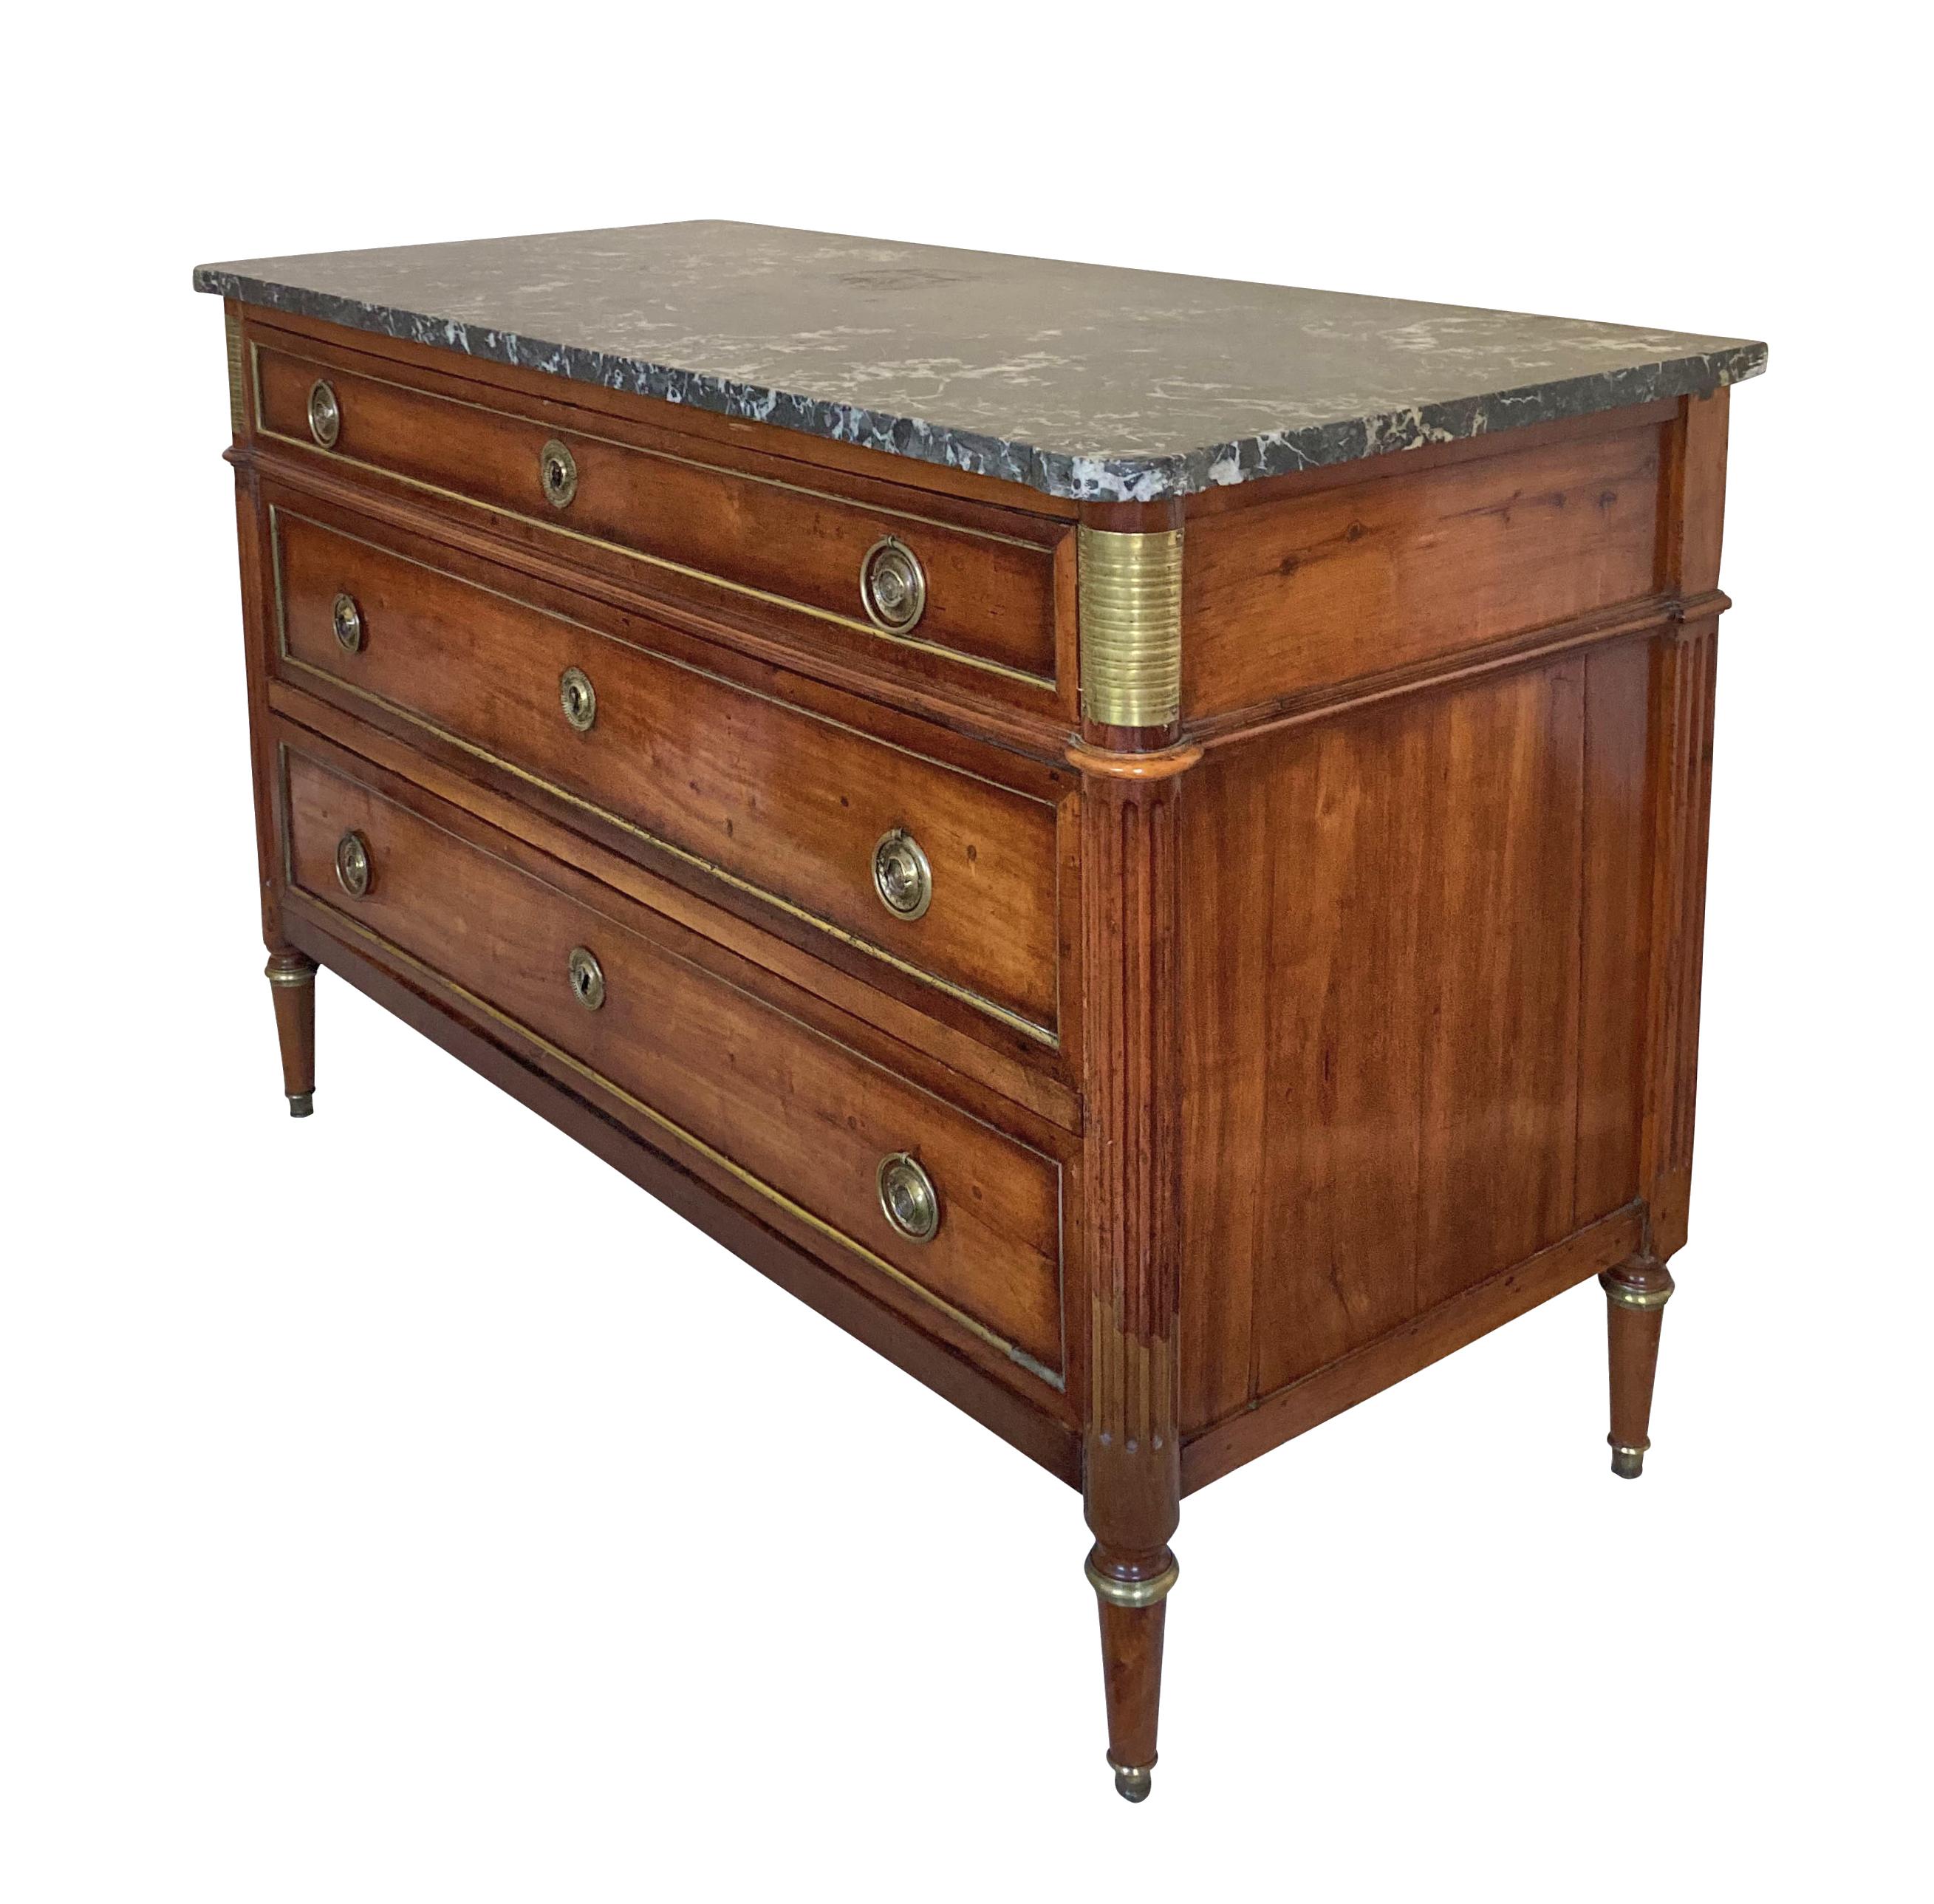 A fine French Louis XVI walnut commode of three drawers, with brass filleting, handles, sabot, and match strikers. The shaped top of variegated grey fossil marble, overall, with very good patina.